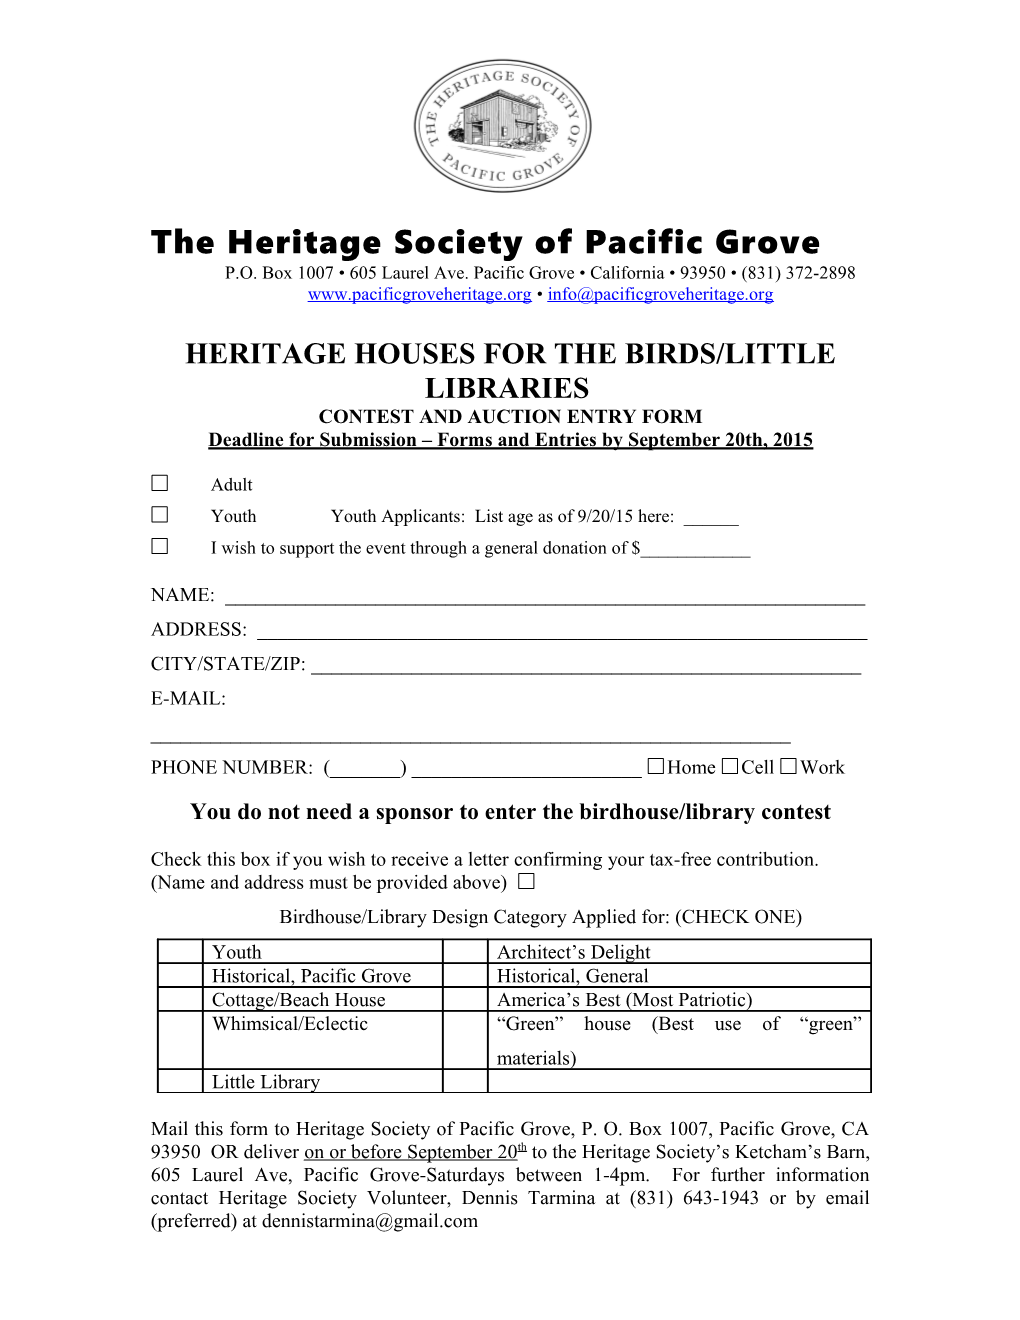 The Heritage Society of Pacific Grove